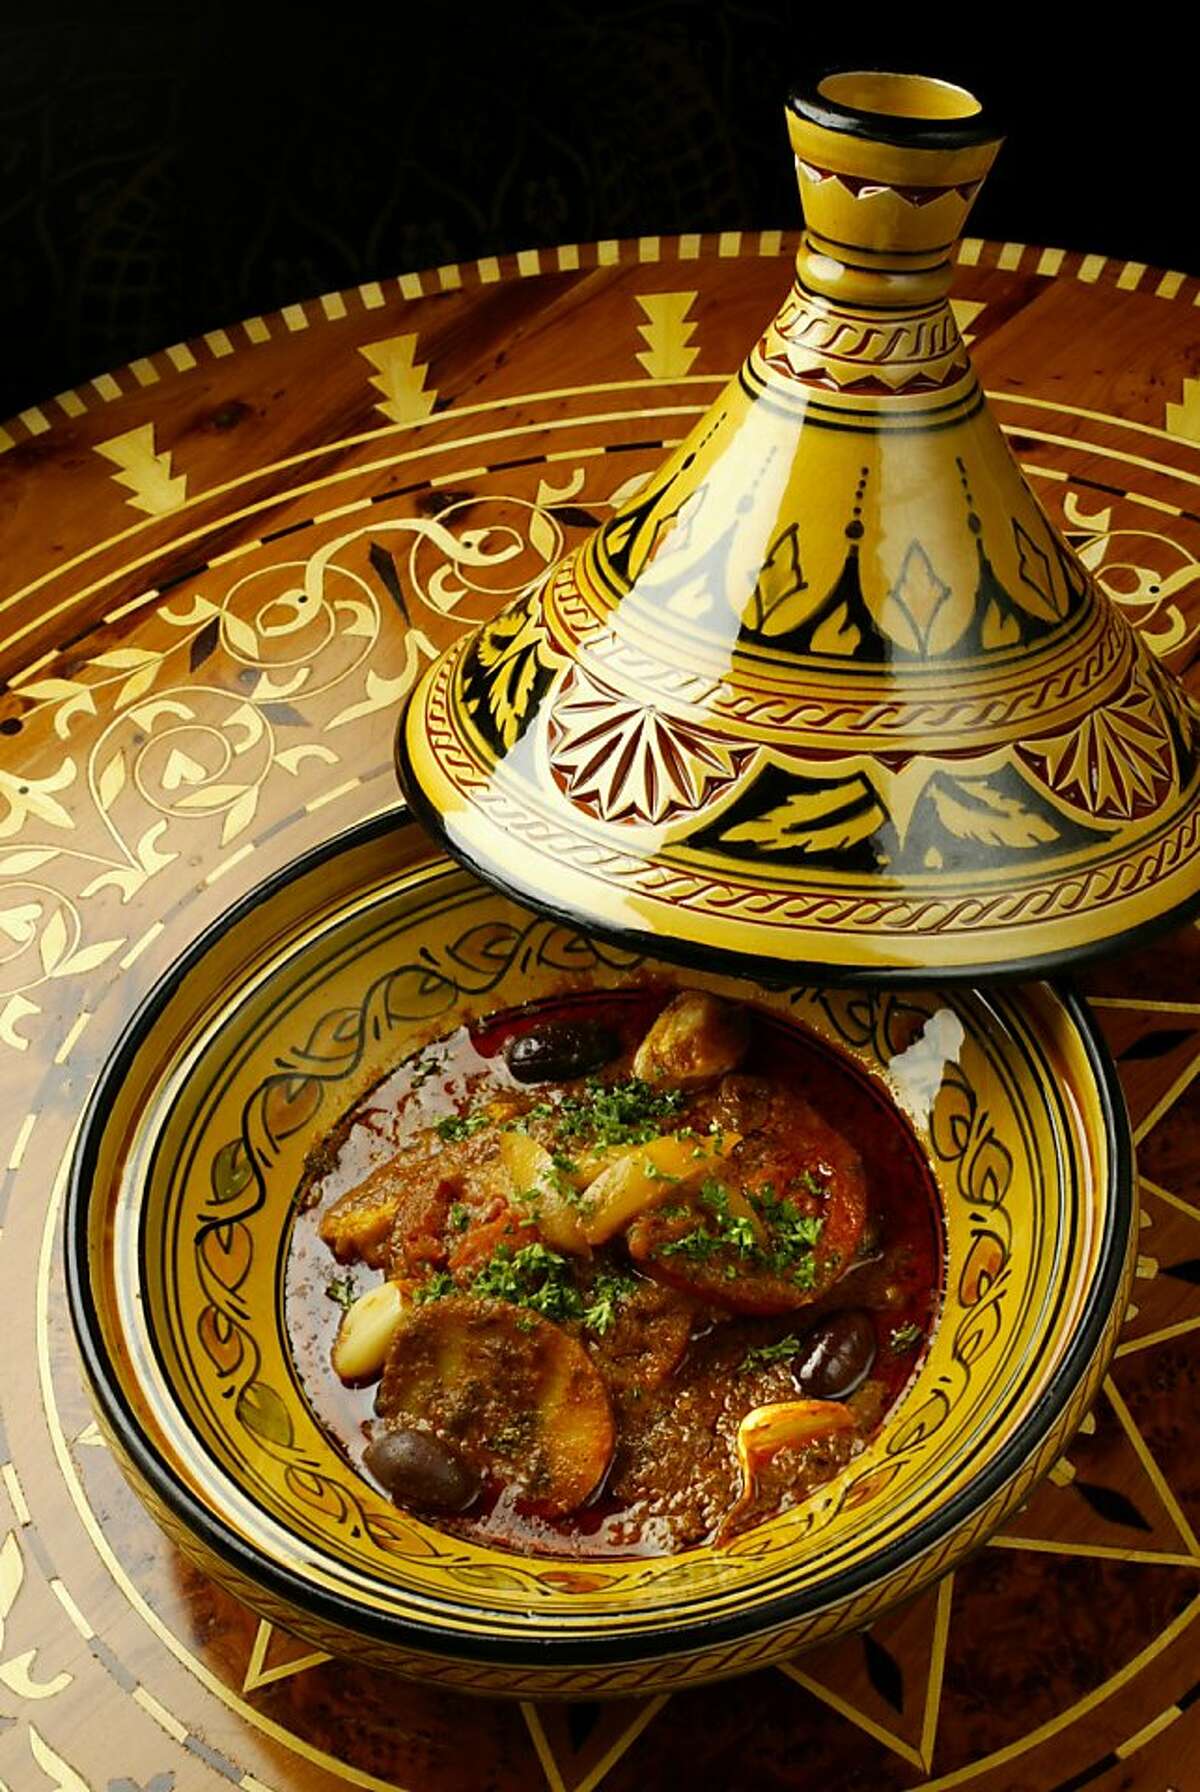 El Mansour, a Moroccan restaurant in San Francisco at 3119 Clement Street. Tangine with sea bass.